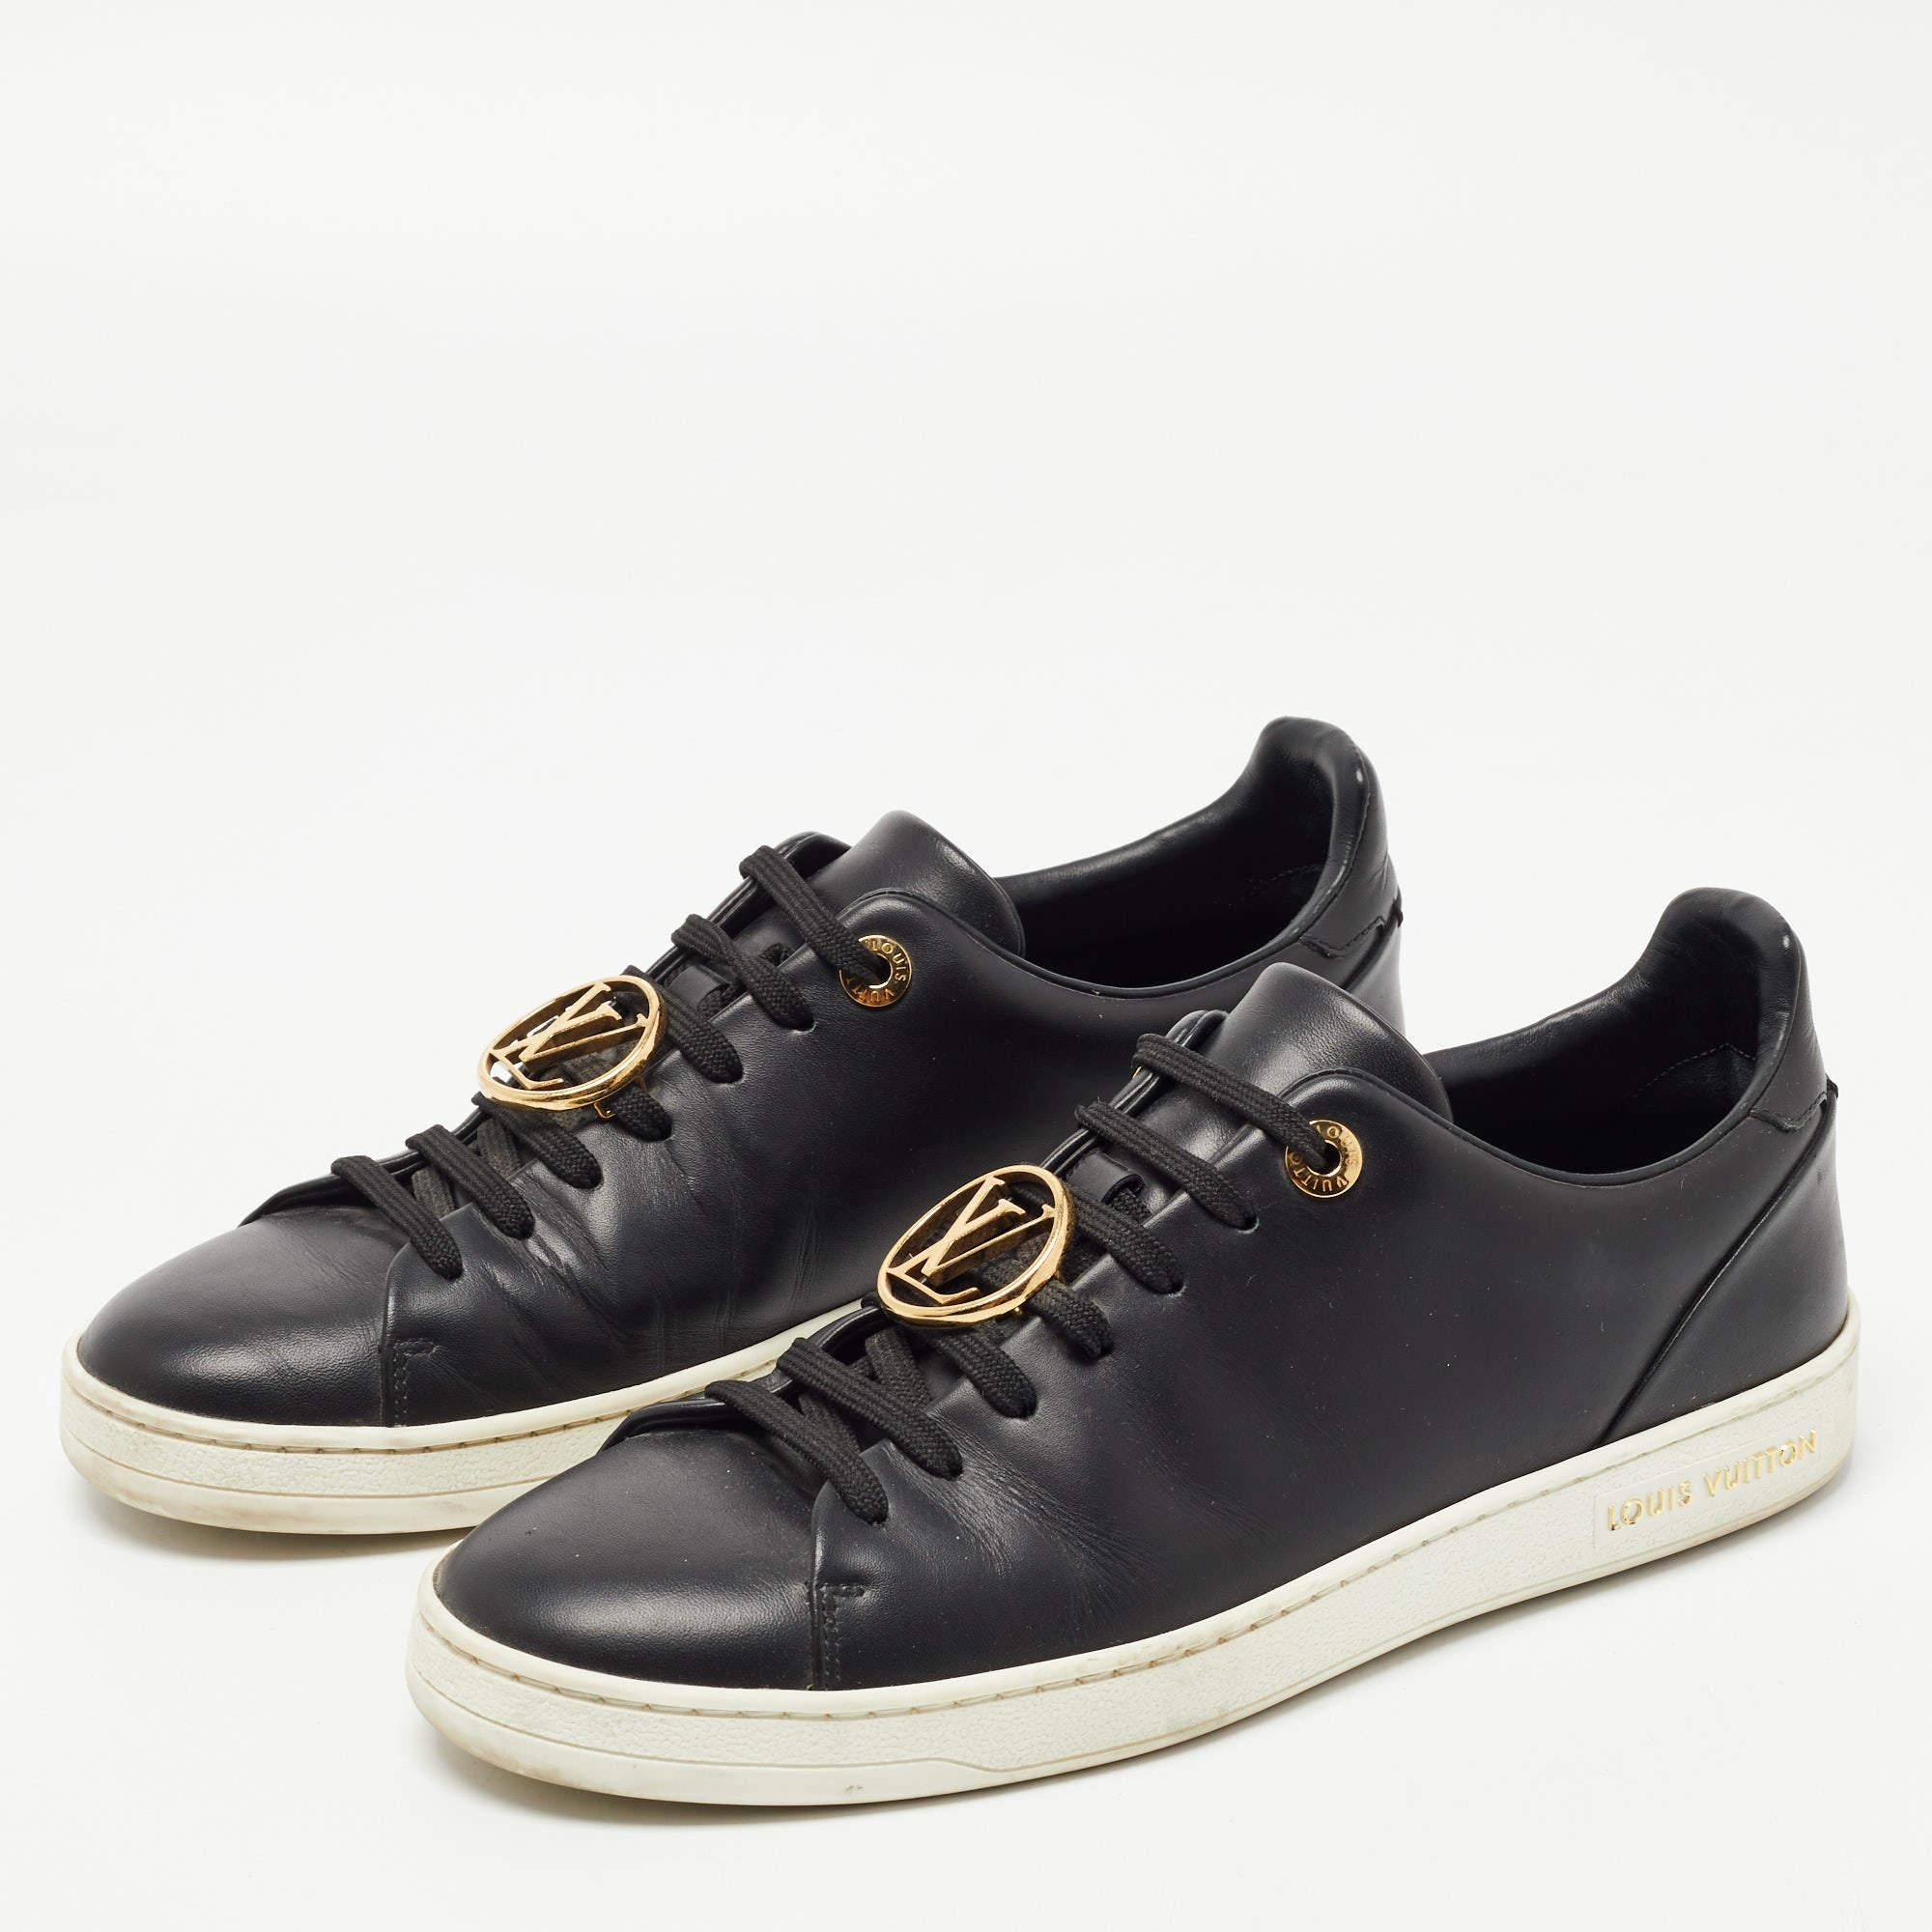 These Frontrow sneakers from Louis Vuitton are all you need to add an extra edge to your outfit. This black pair has been crafted from leather and styled with round toes, lace-ups, and gold-tone logo details on the upper. Balanced on rubber soles,